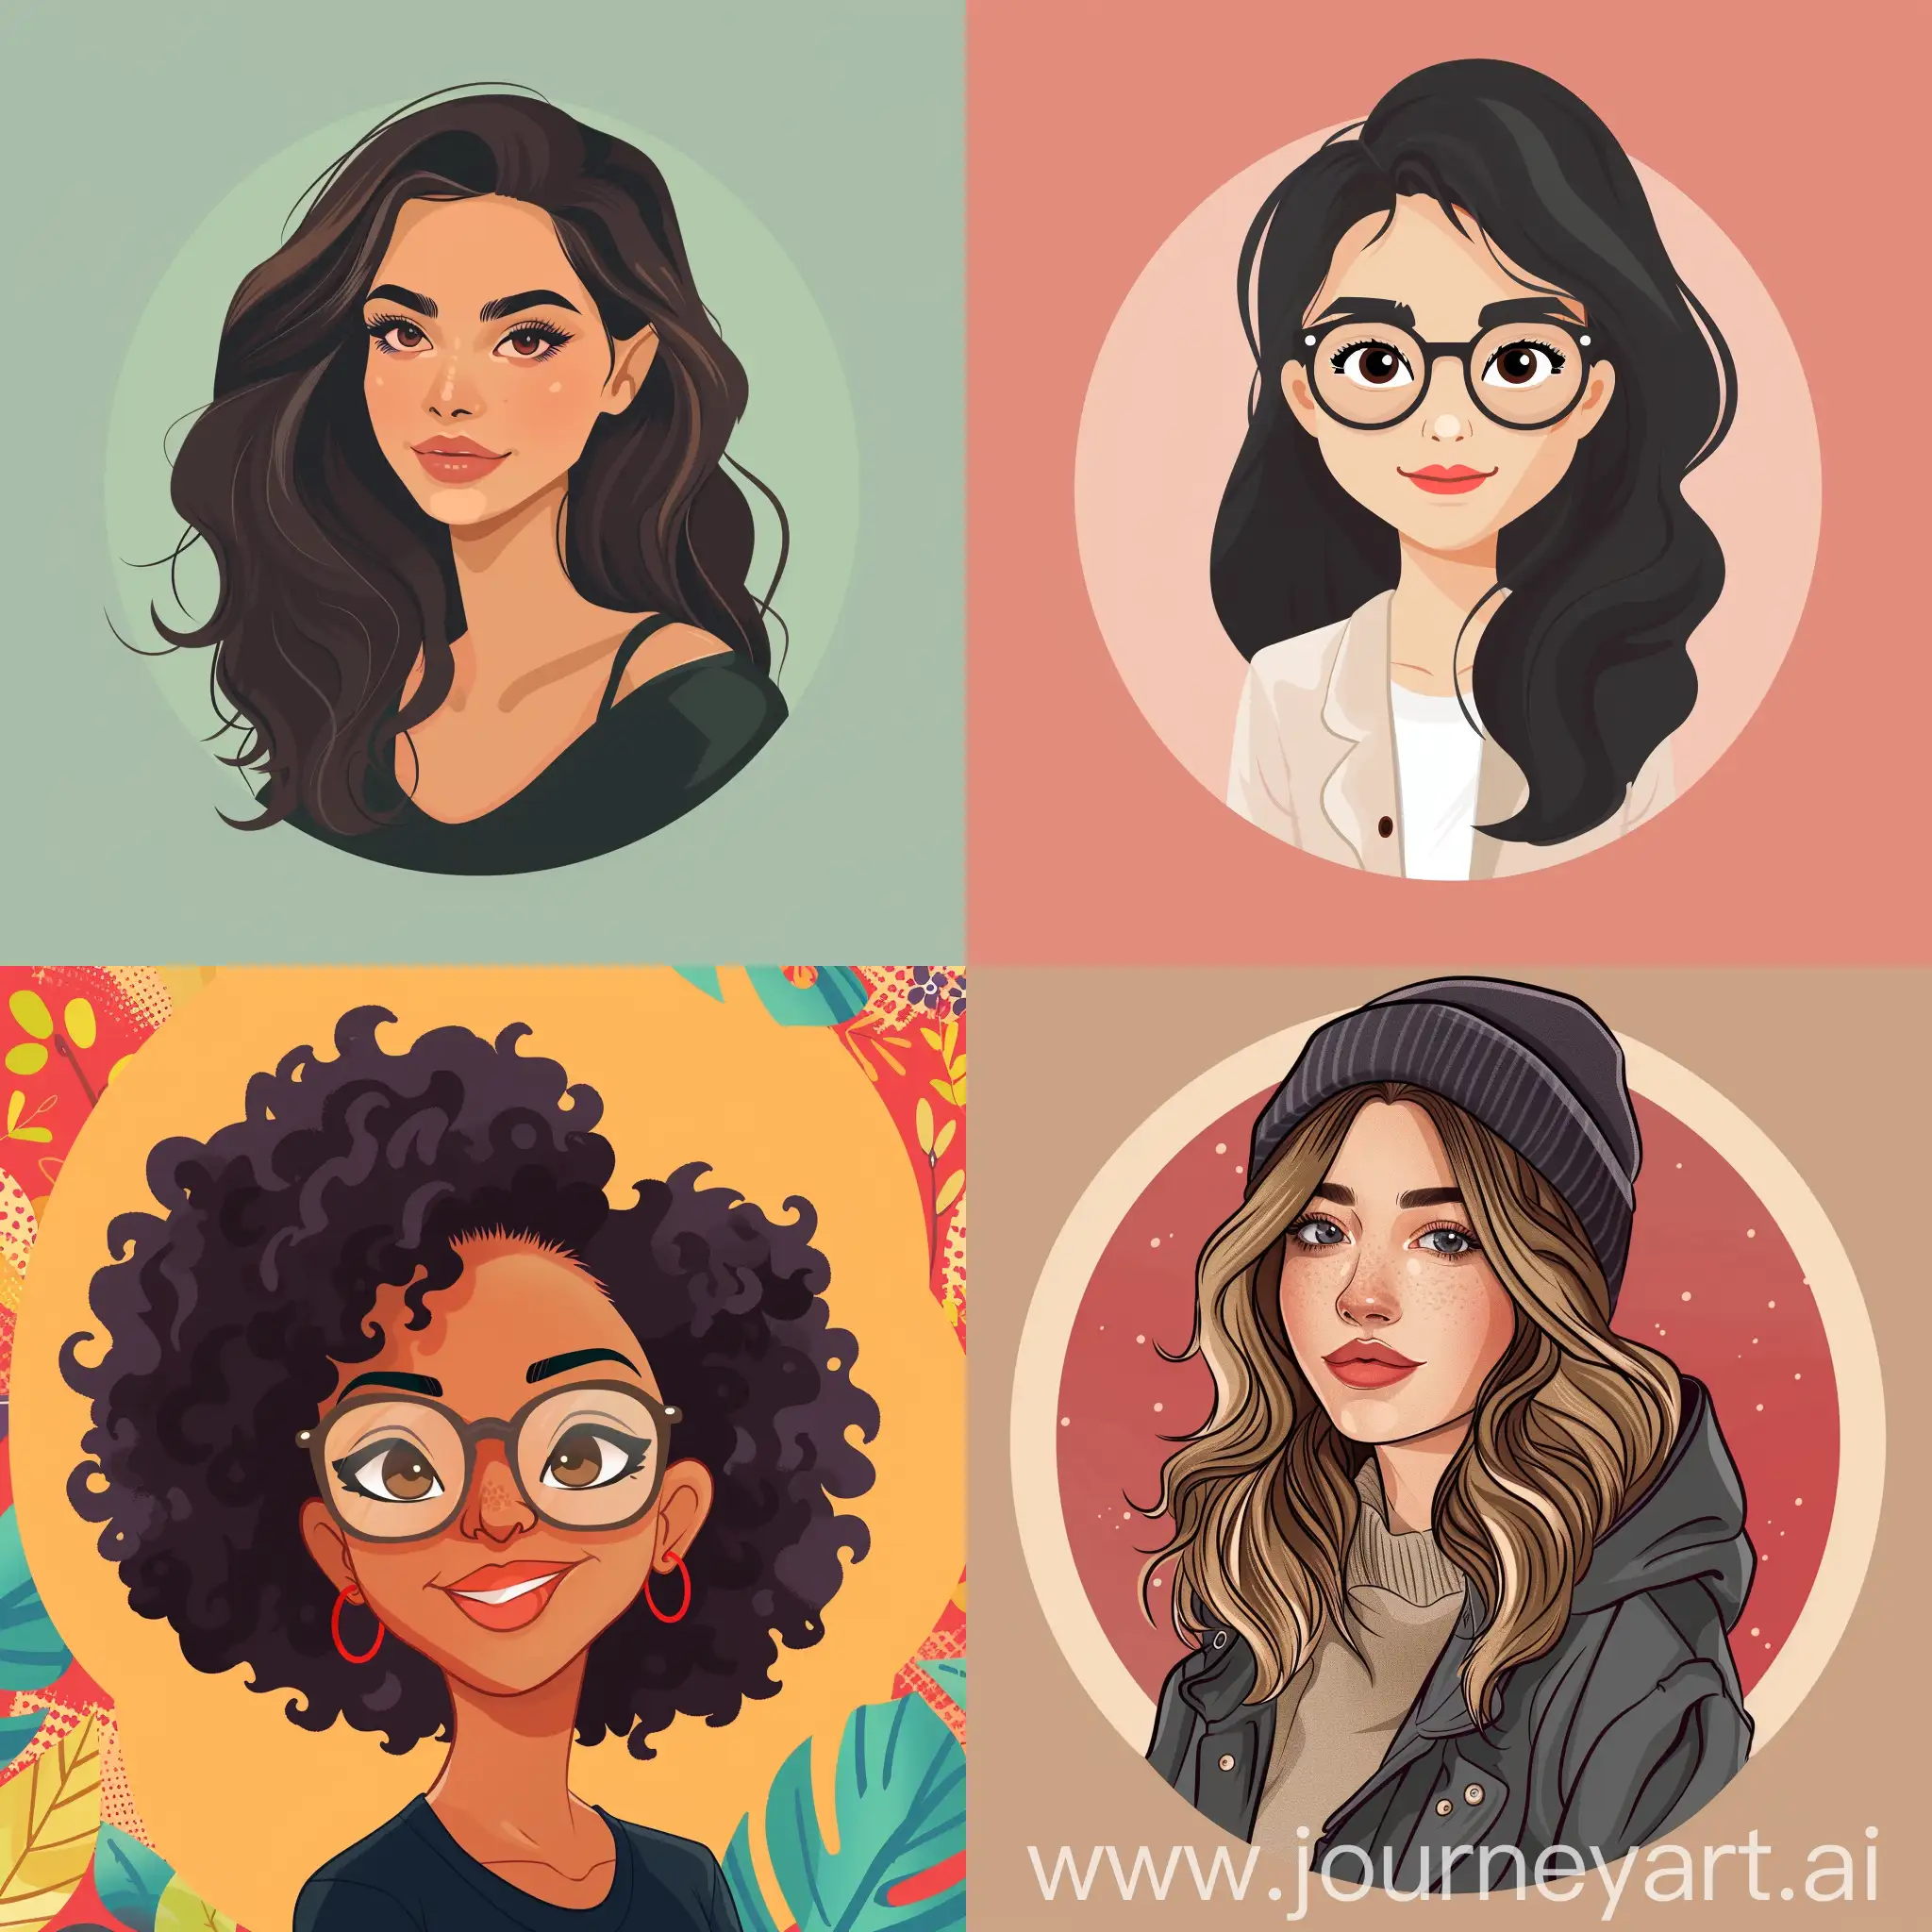 Help me design a social media avatar in a fresh, young style!